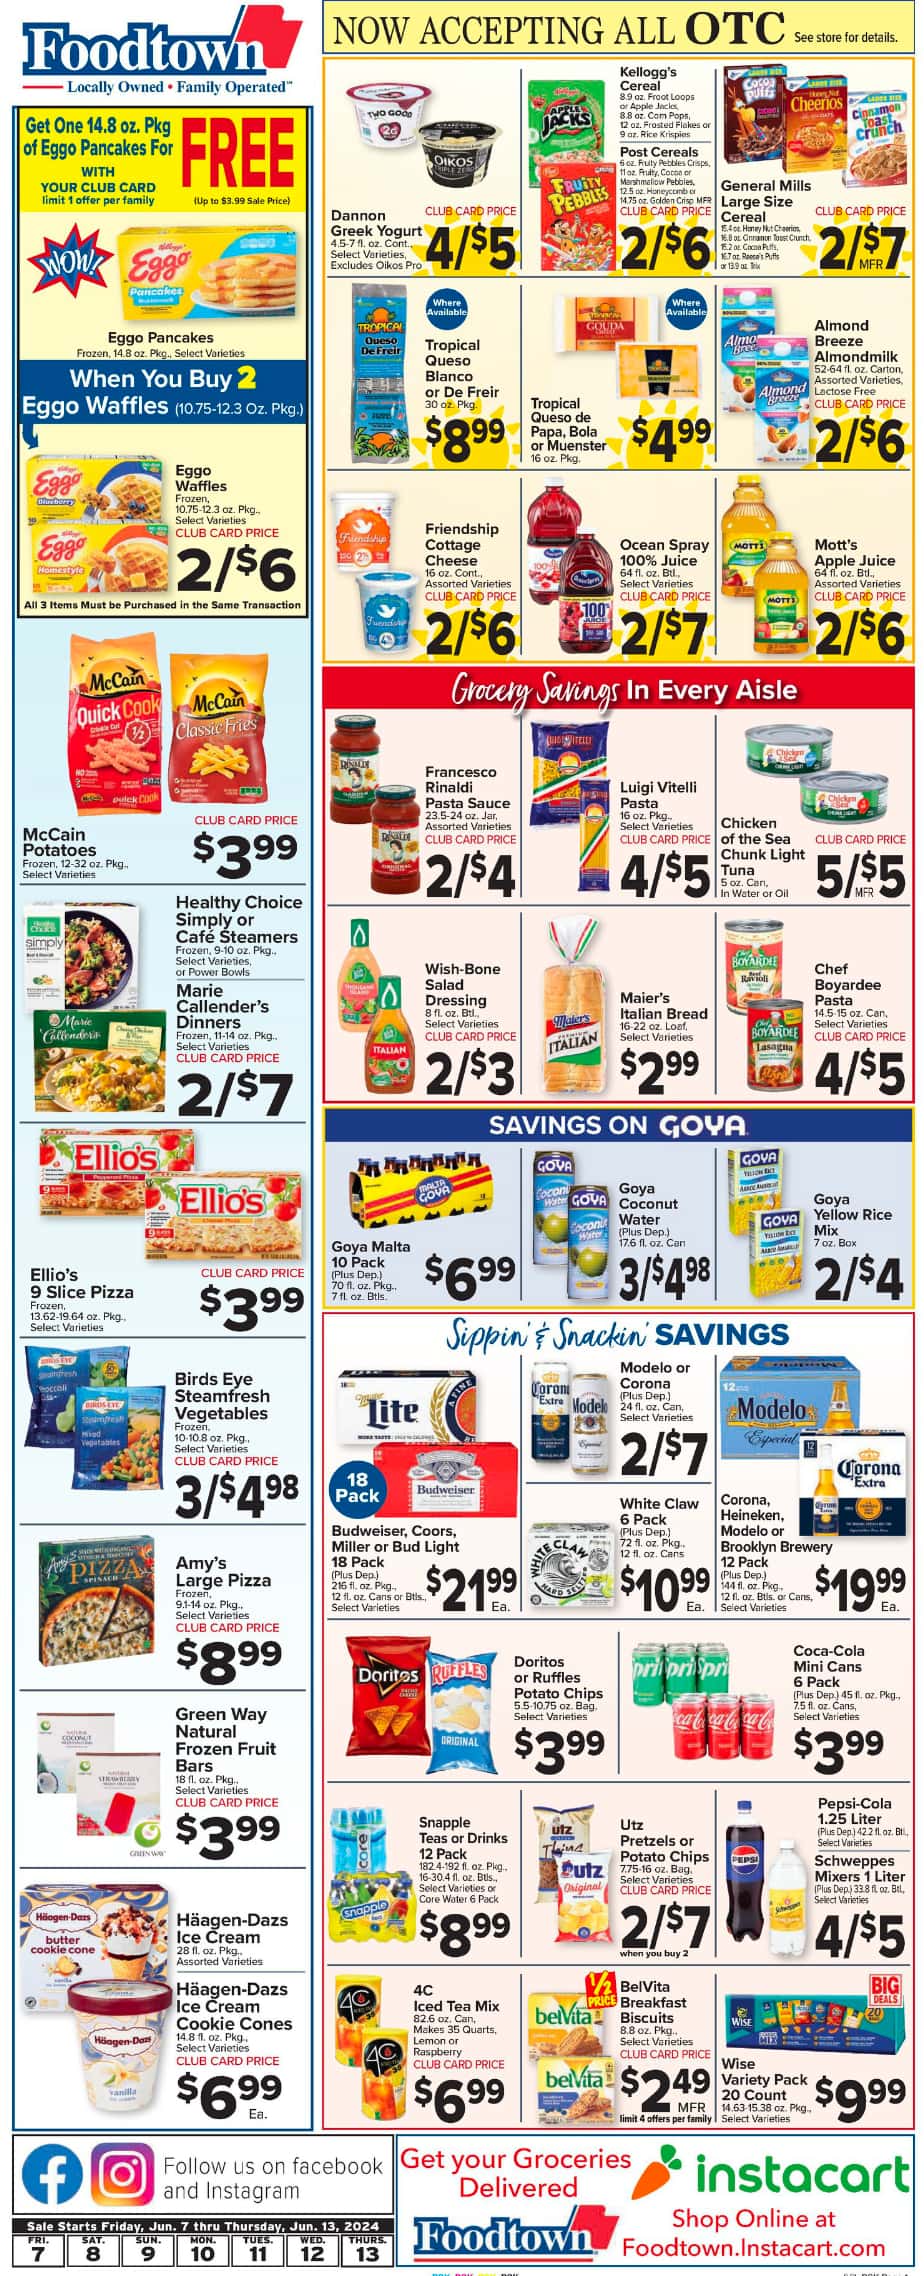 Foodtown July 2024 Weekly Sales, Deals, Discounts and Digital Coupons.